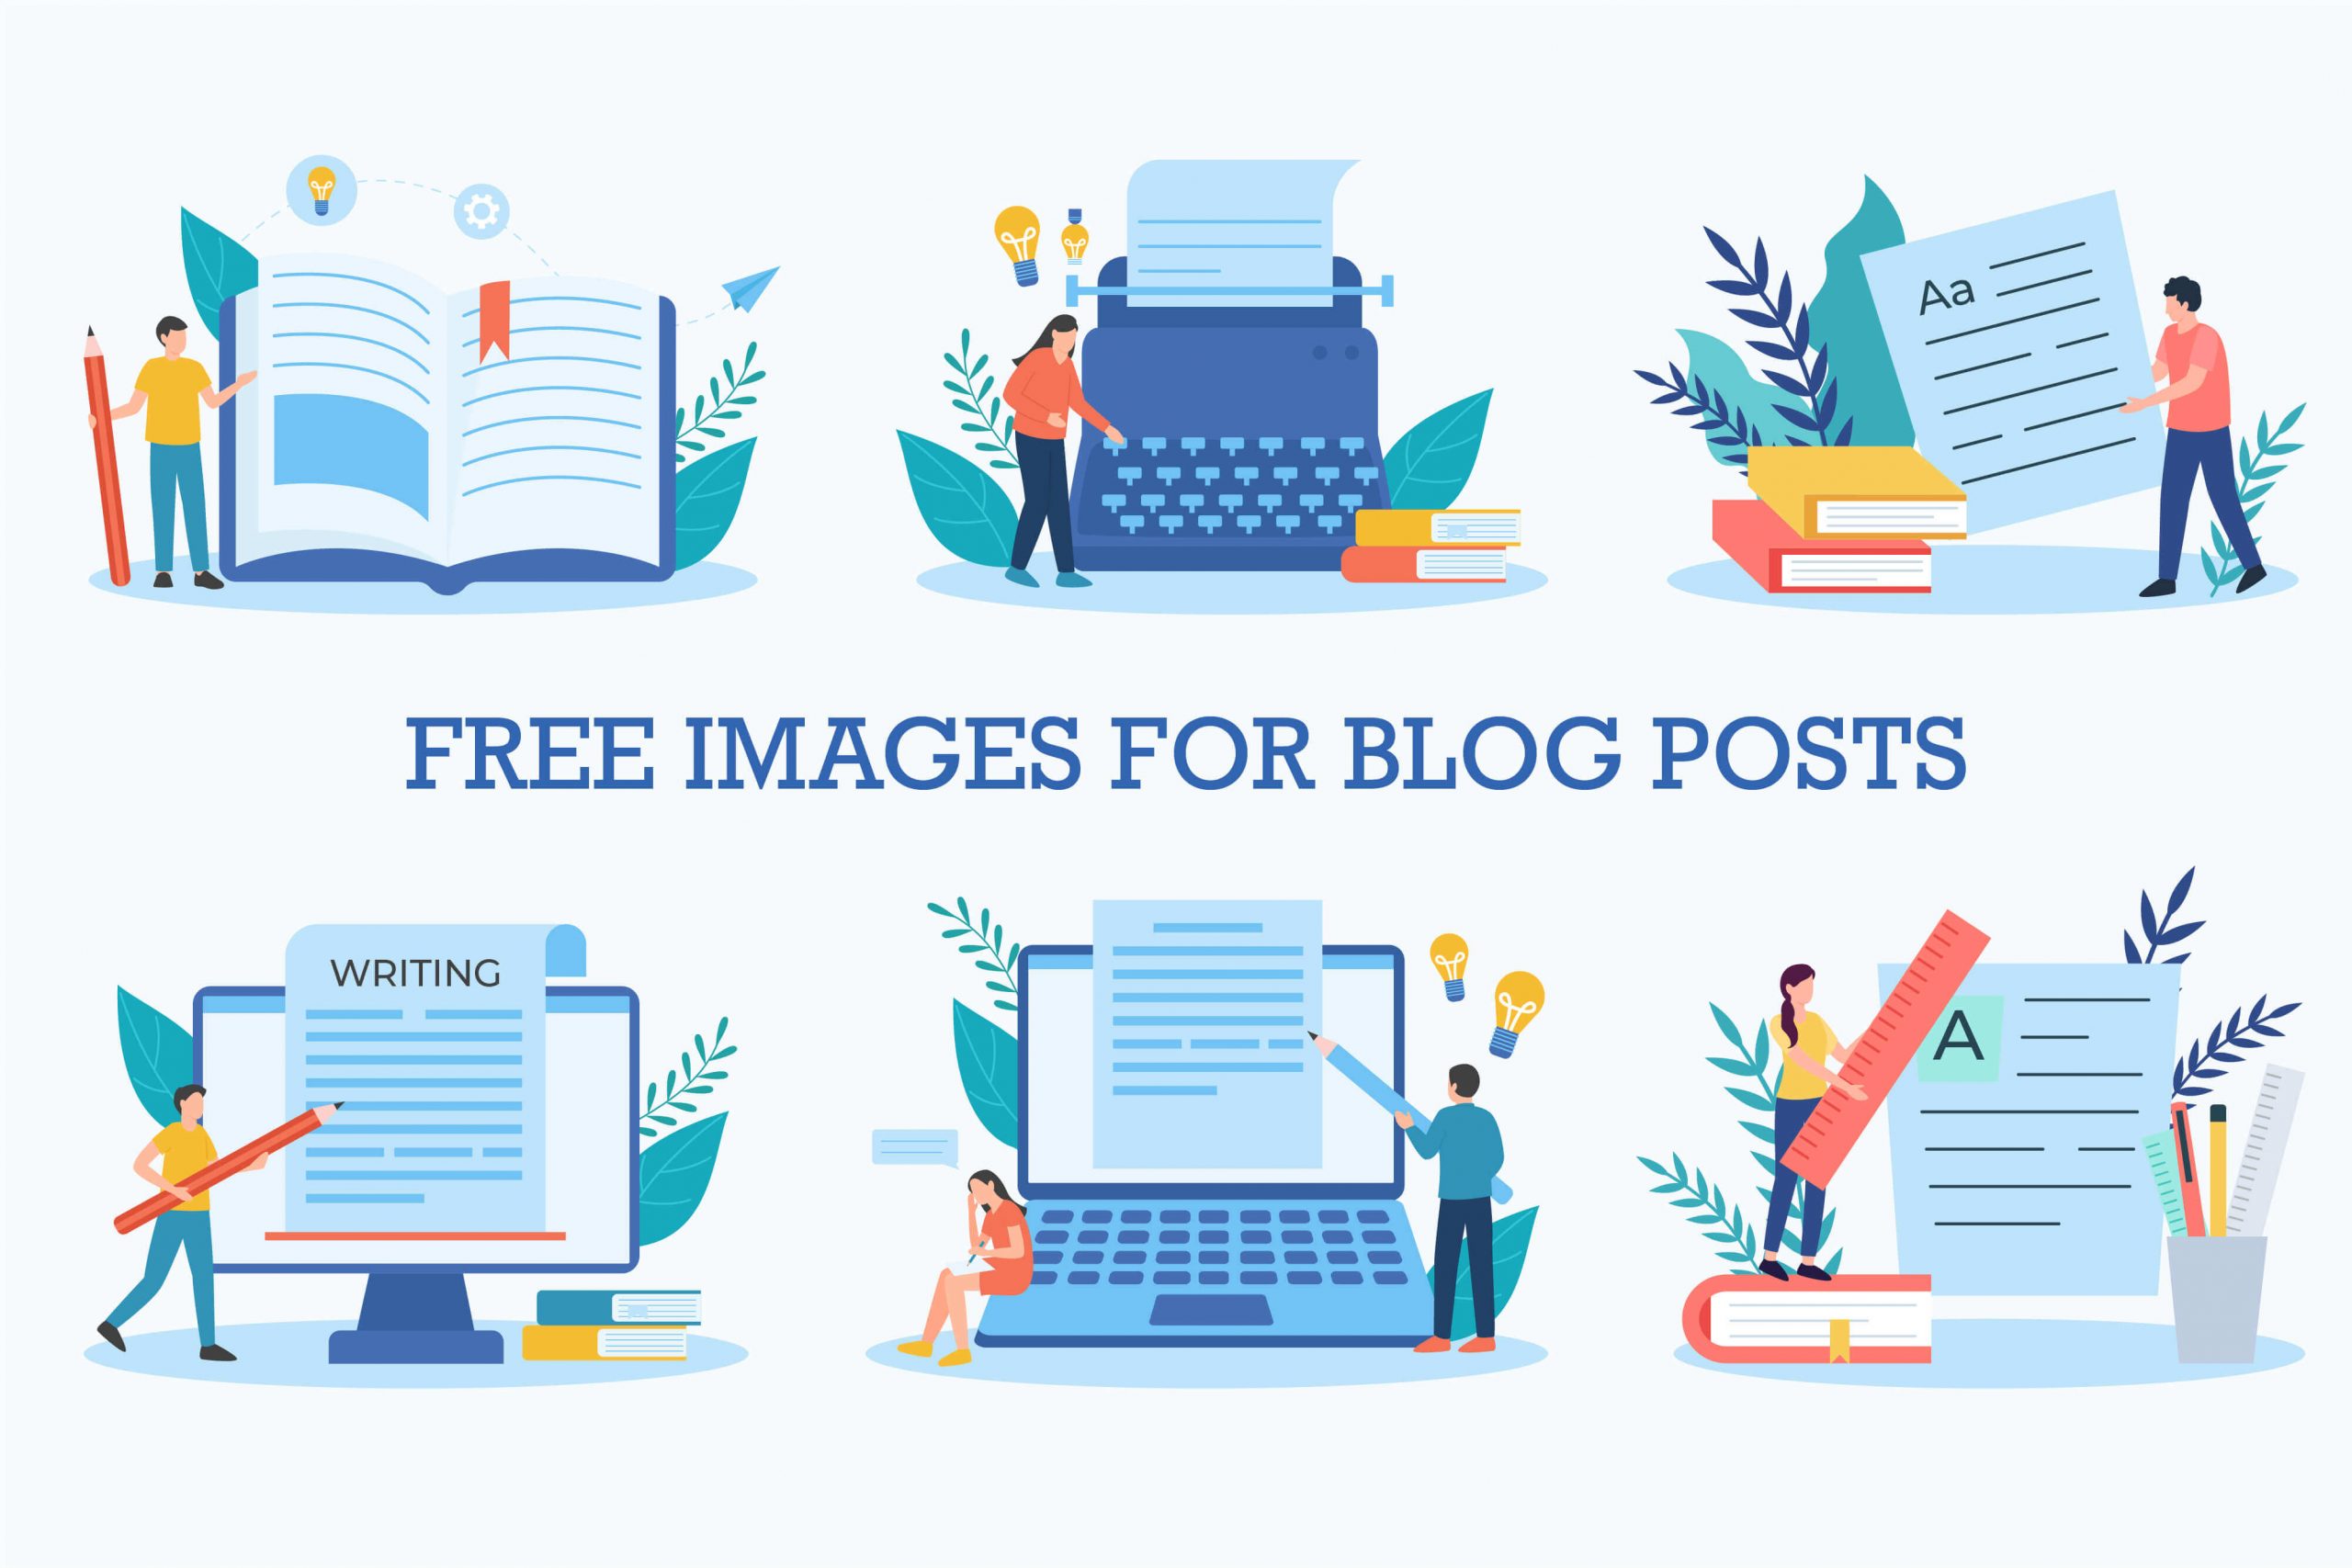 10 Best Places to Find Free Images for Blog Posts